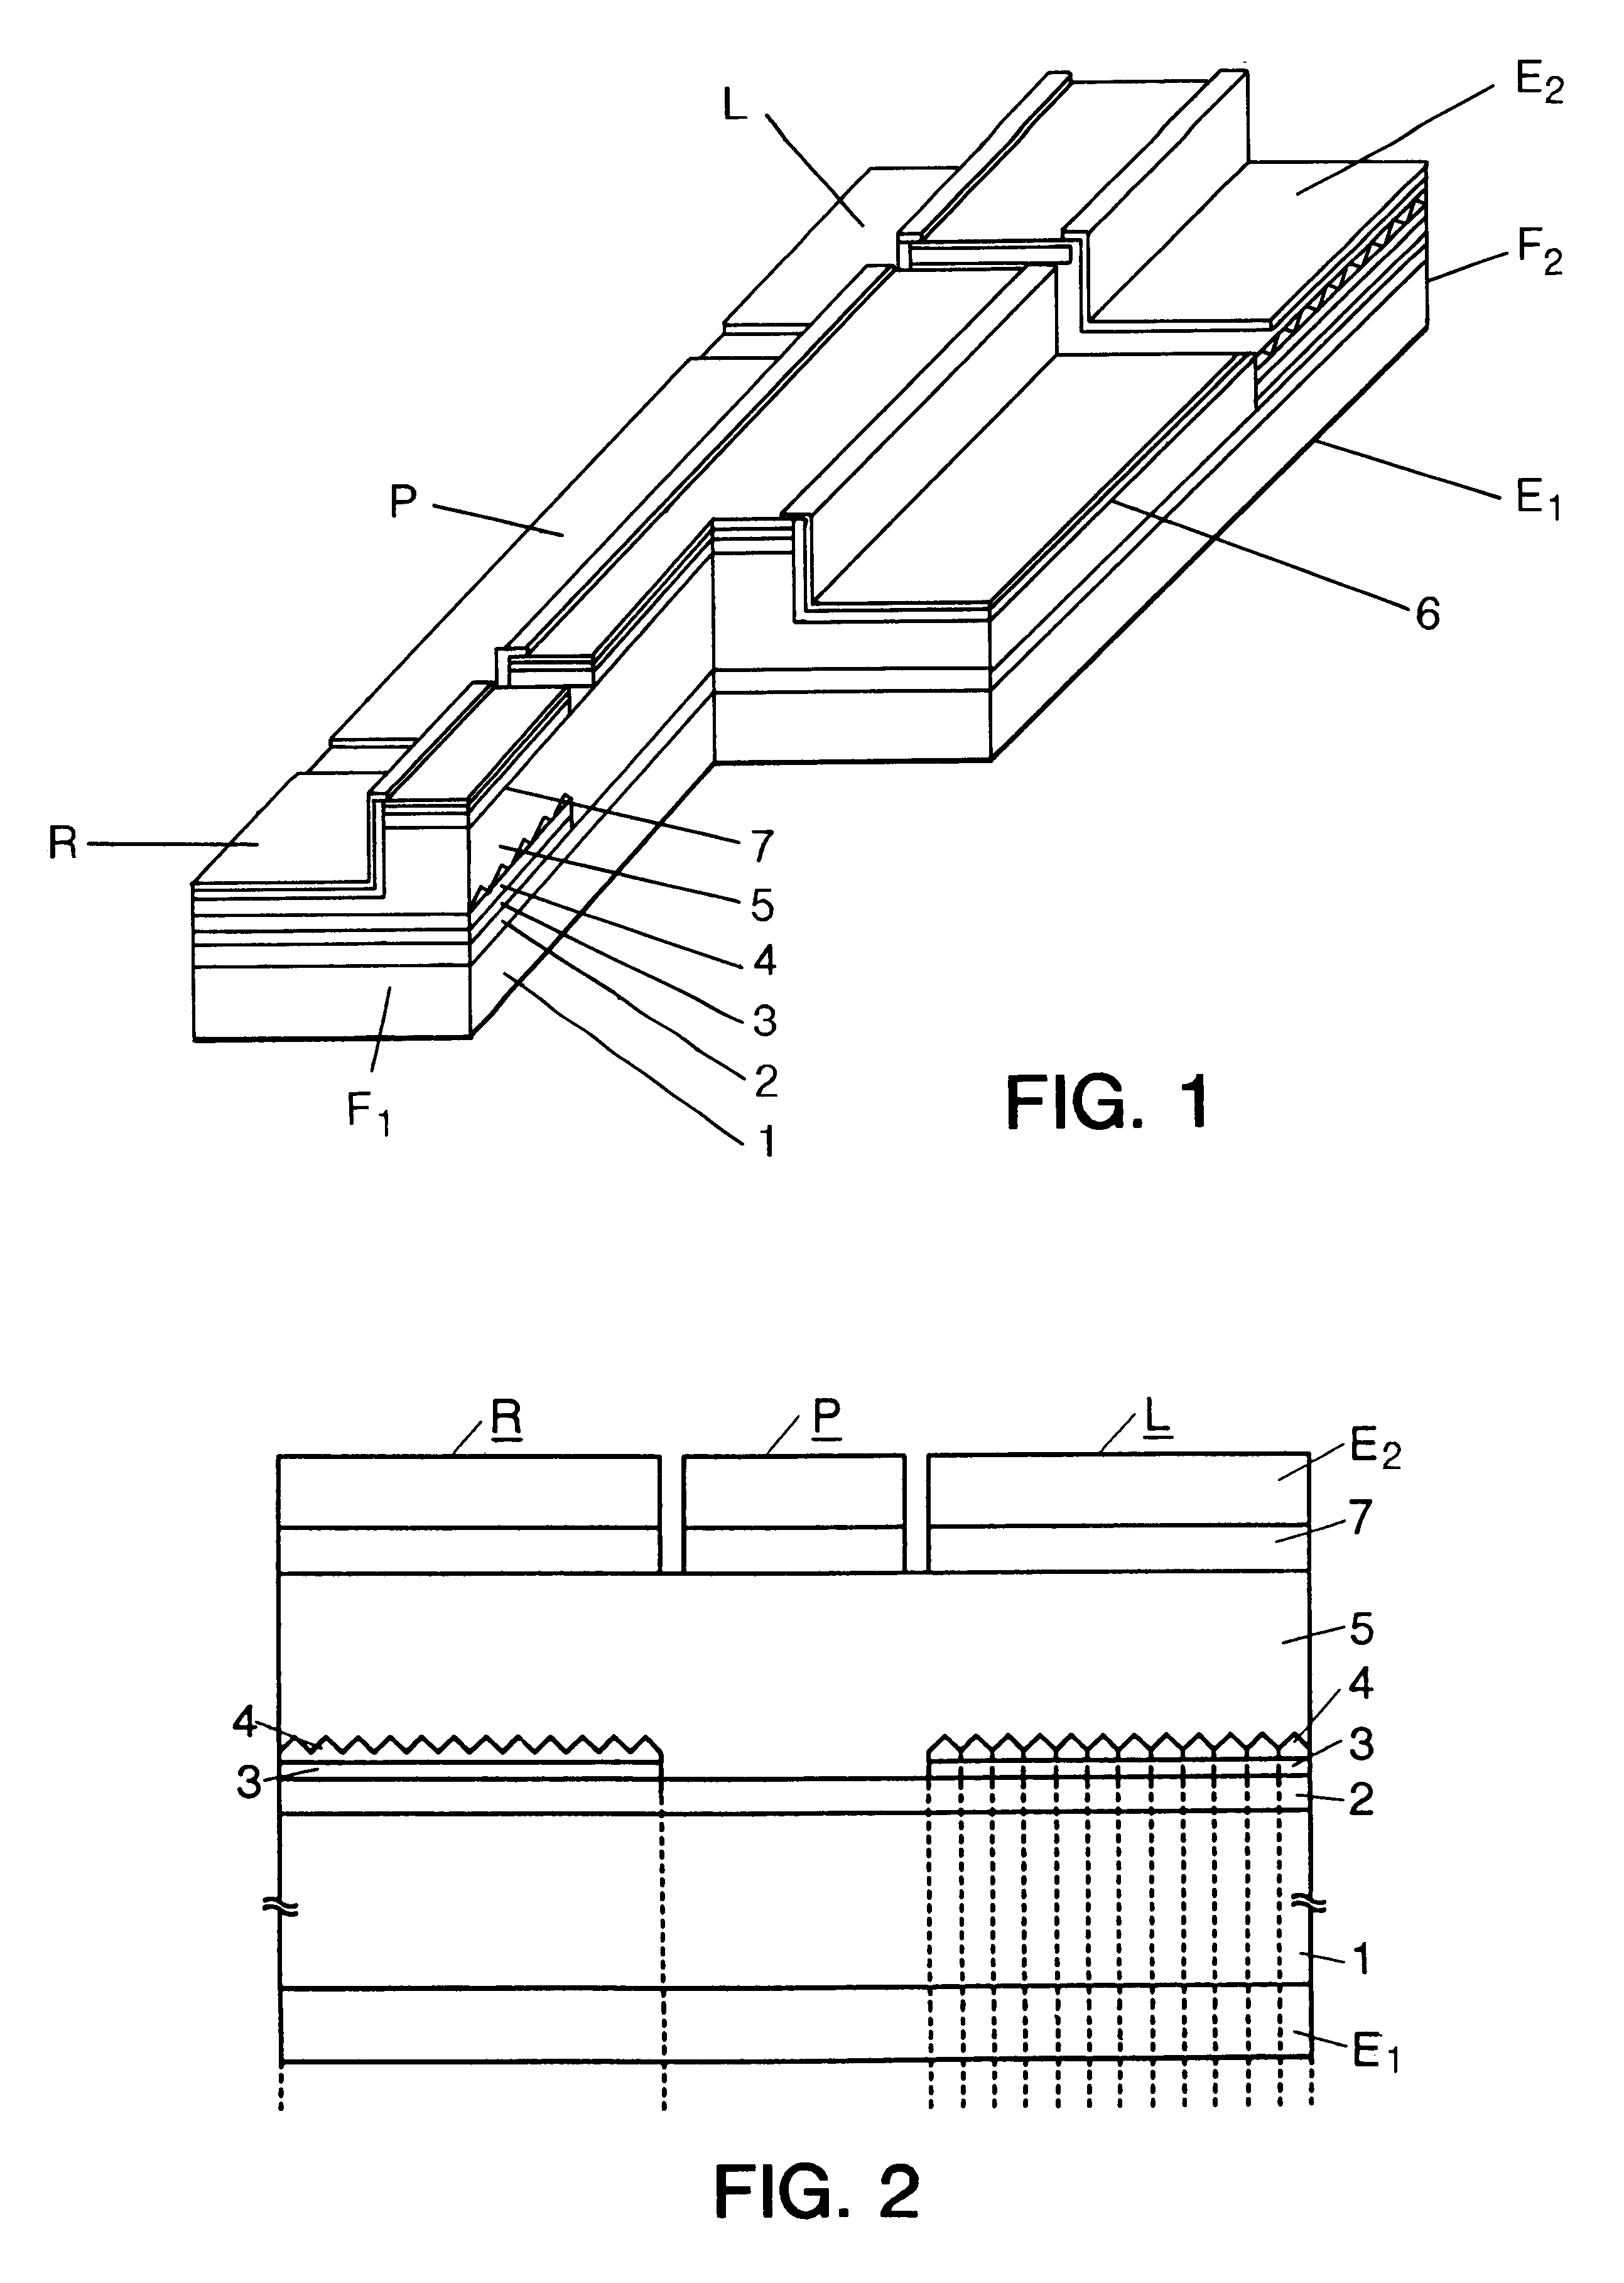 Q-switched semiconductor laser